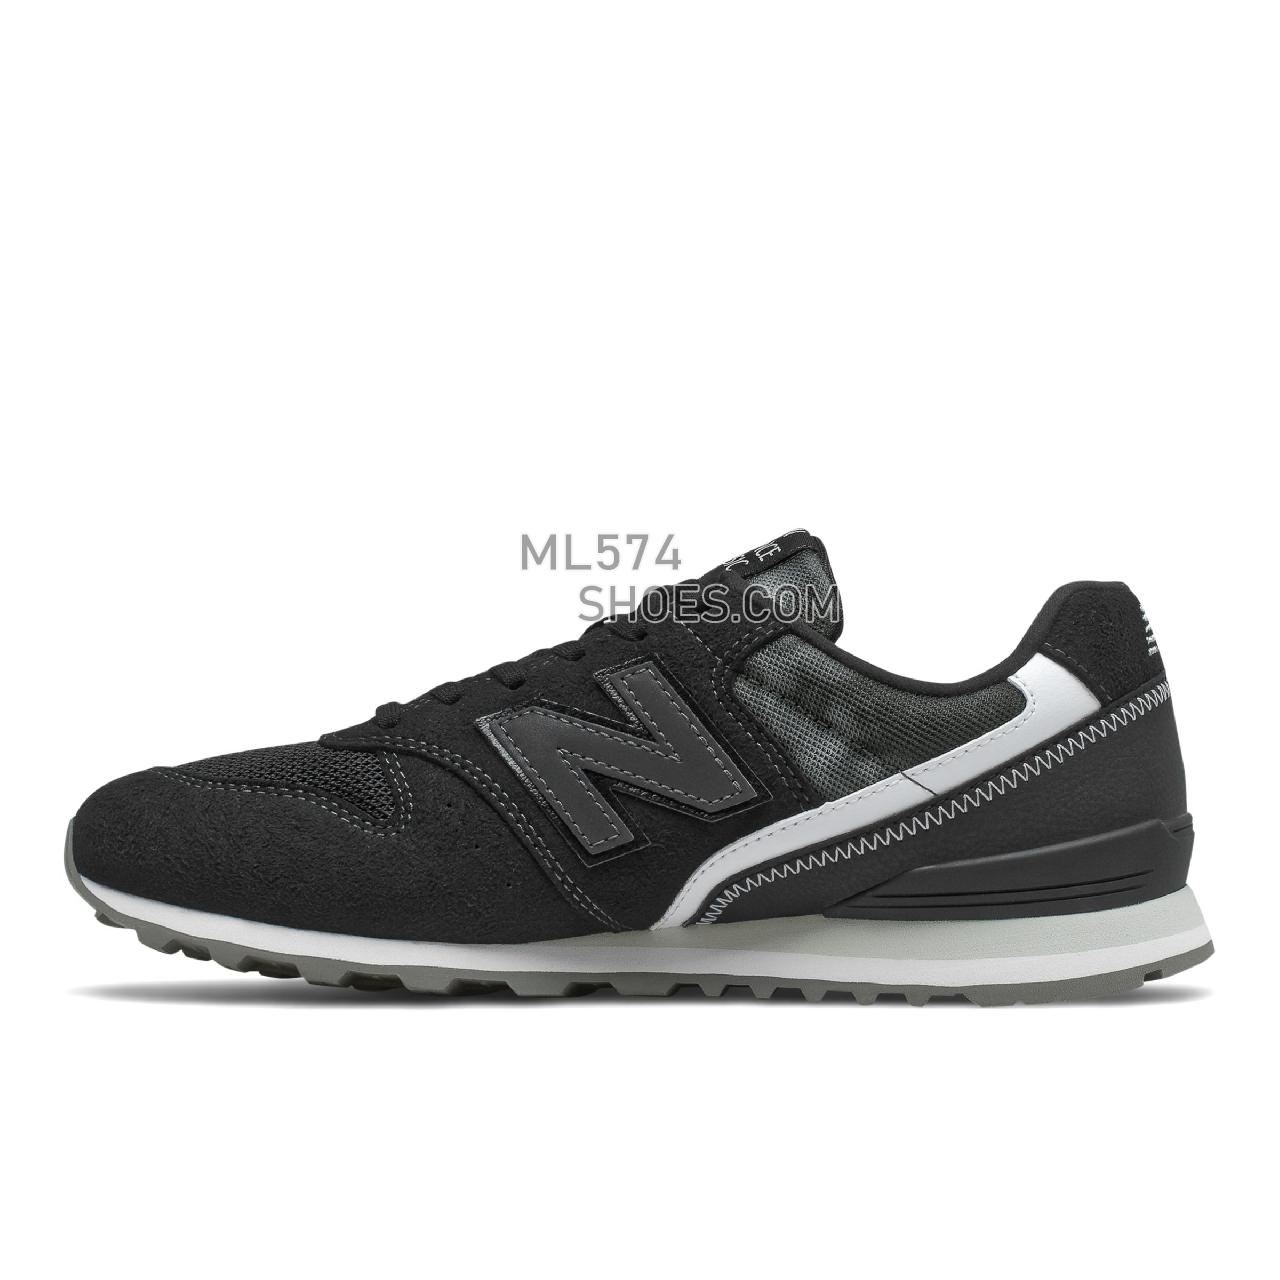 New Balance WL996v2 - Women's Classic Sneakers - Black with White - WL996FPB